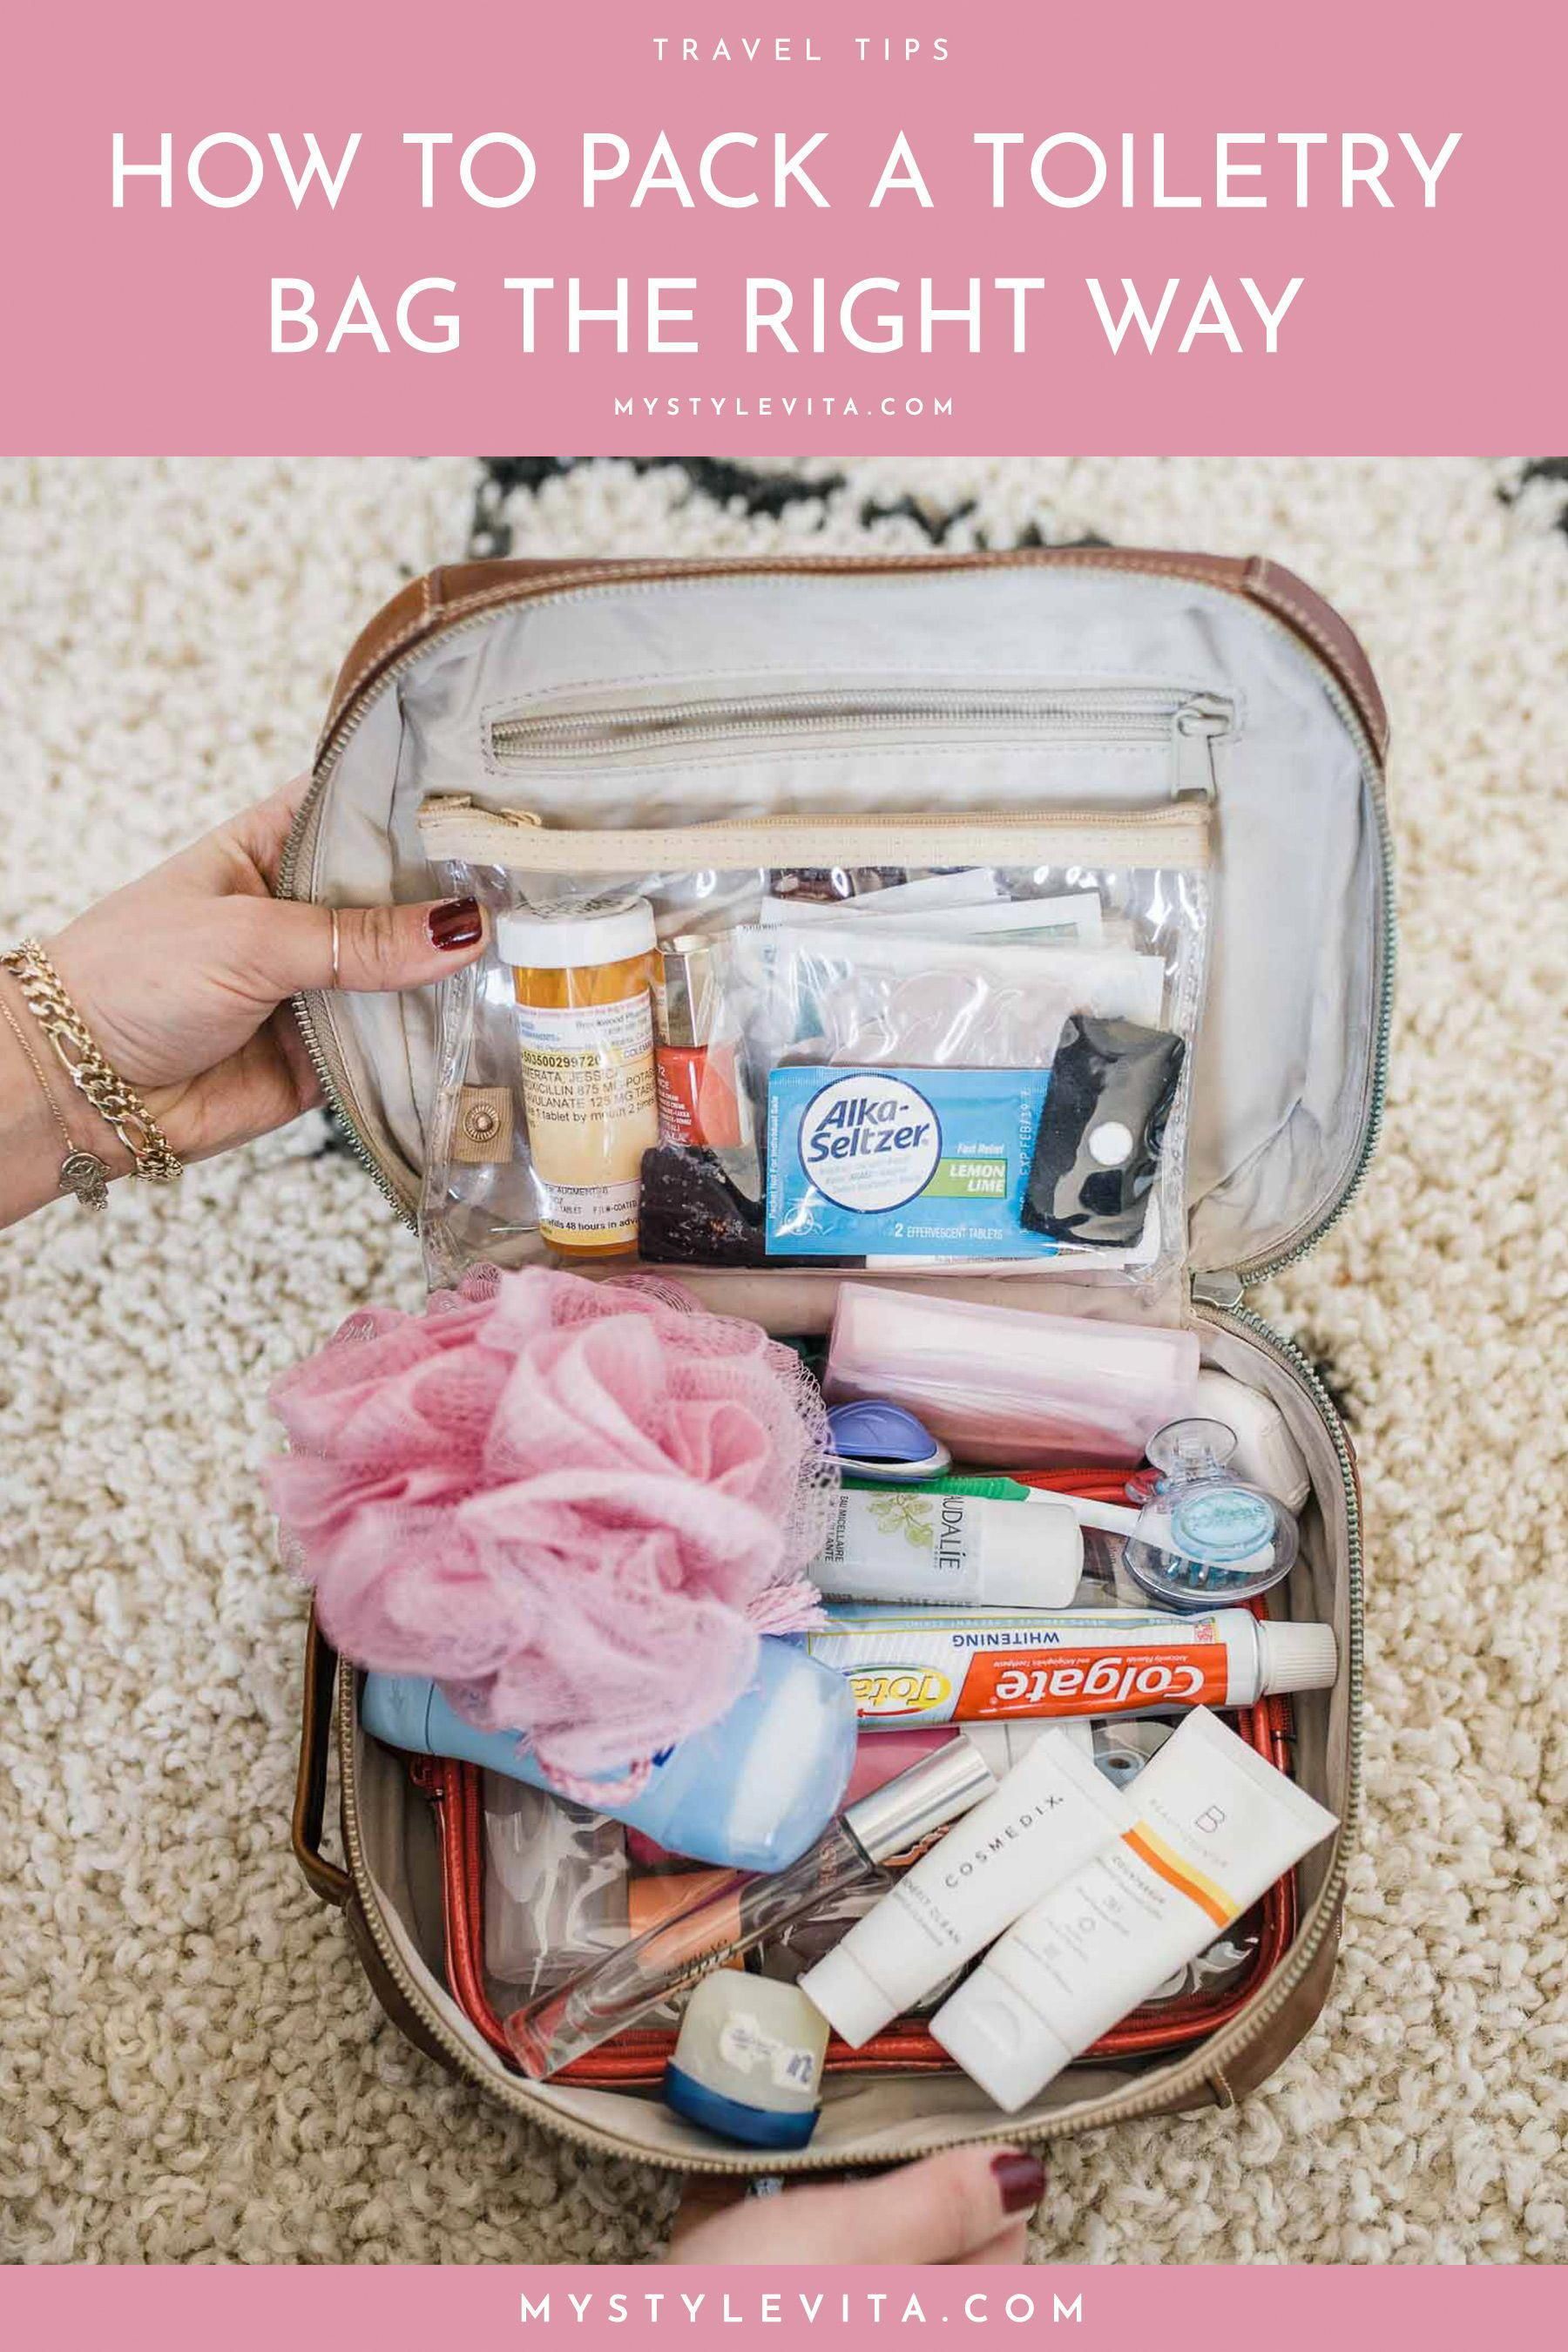 How To Pack A Toiletry Bag & The Essential Toiletries List | My Style Vita - How To Pack A Toiletry Bag & The Essential Toiletries List | My Style Vita -   18 diy Bag travel ideas